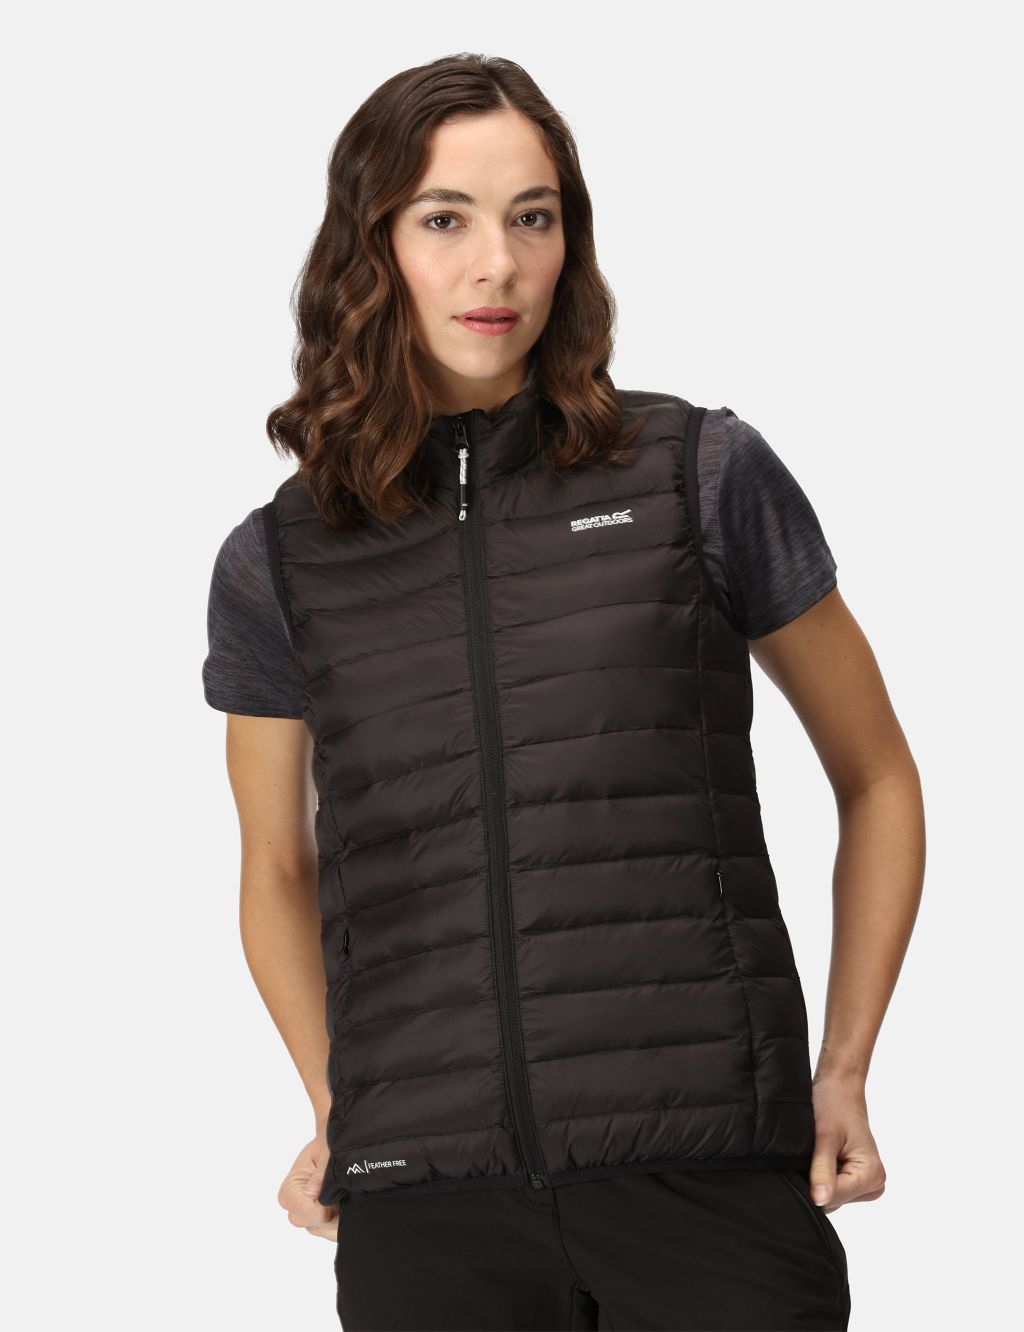 Marizion Water-Repellent Gilet image 1